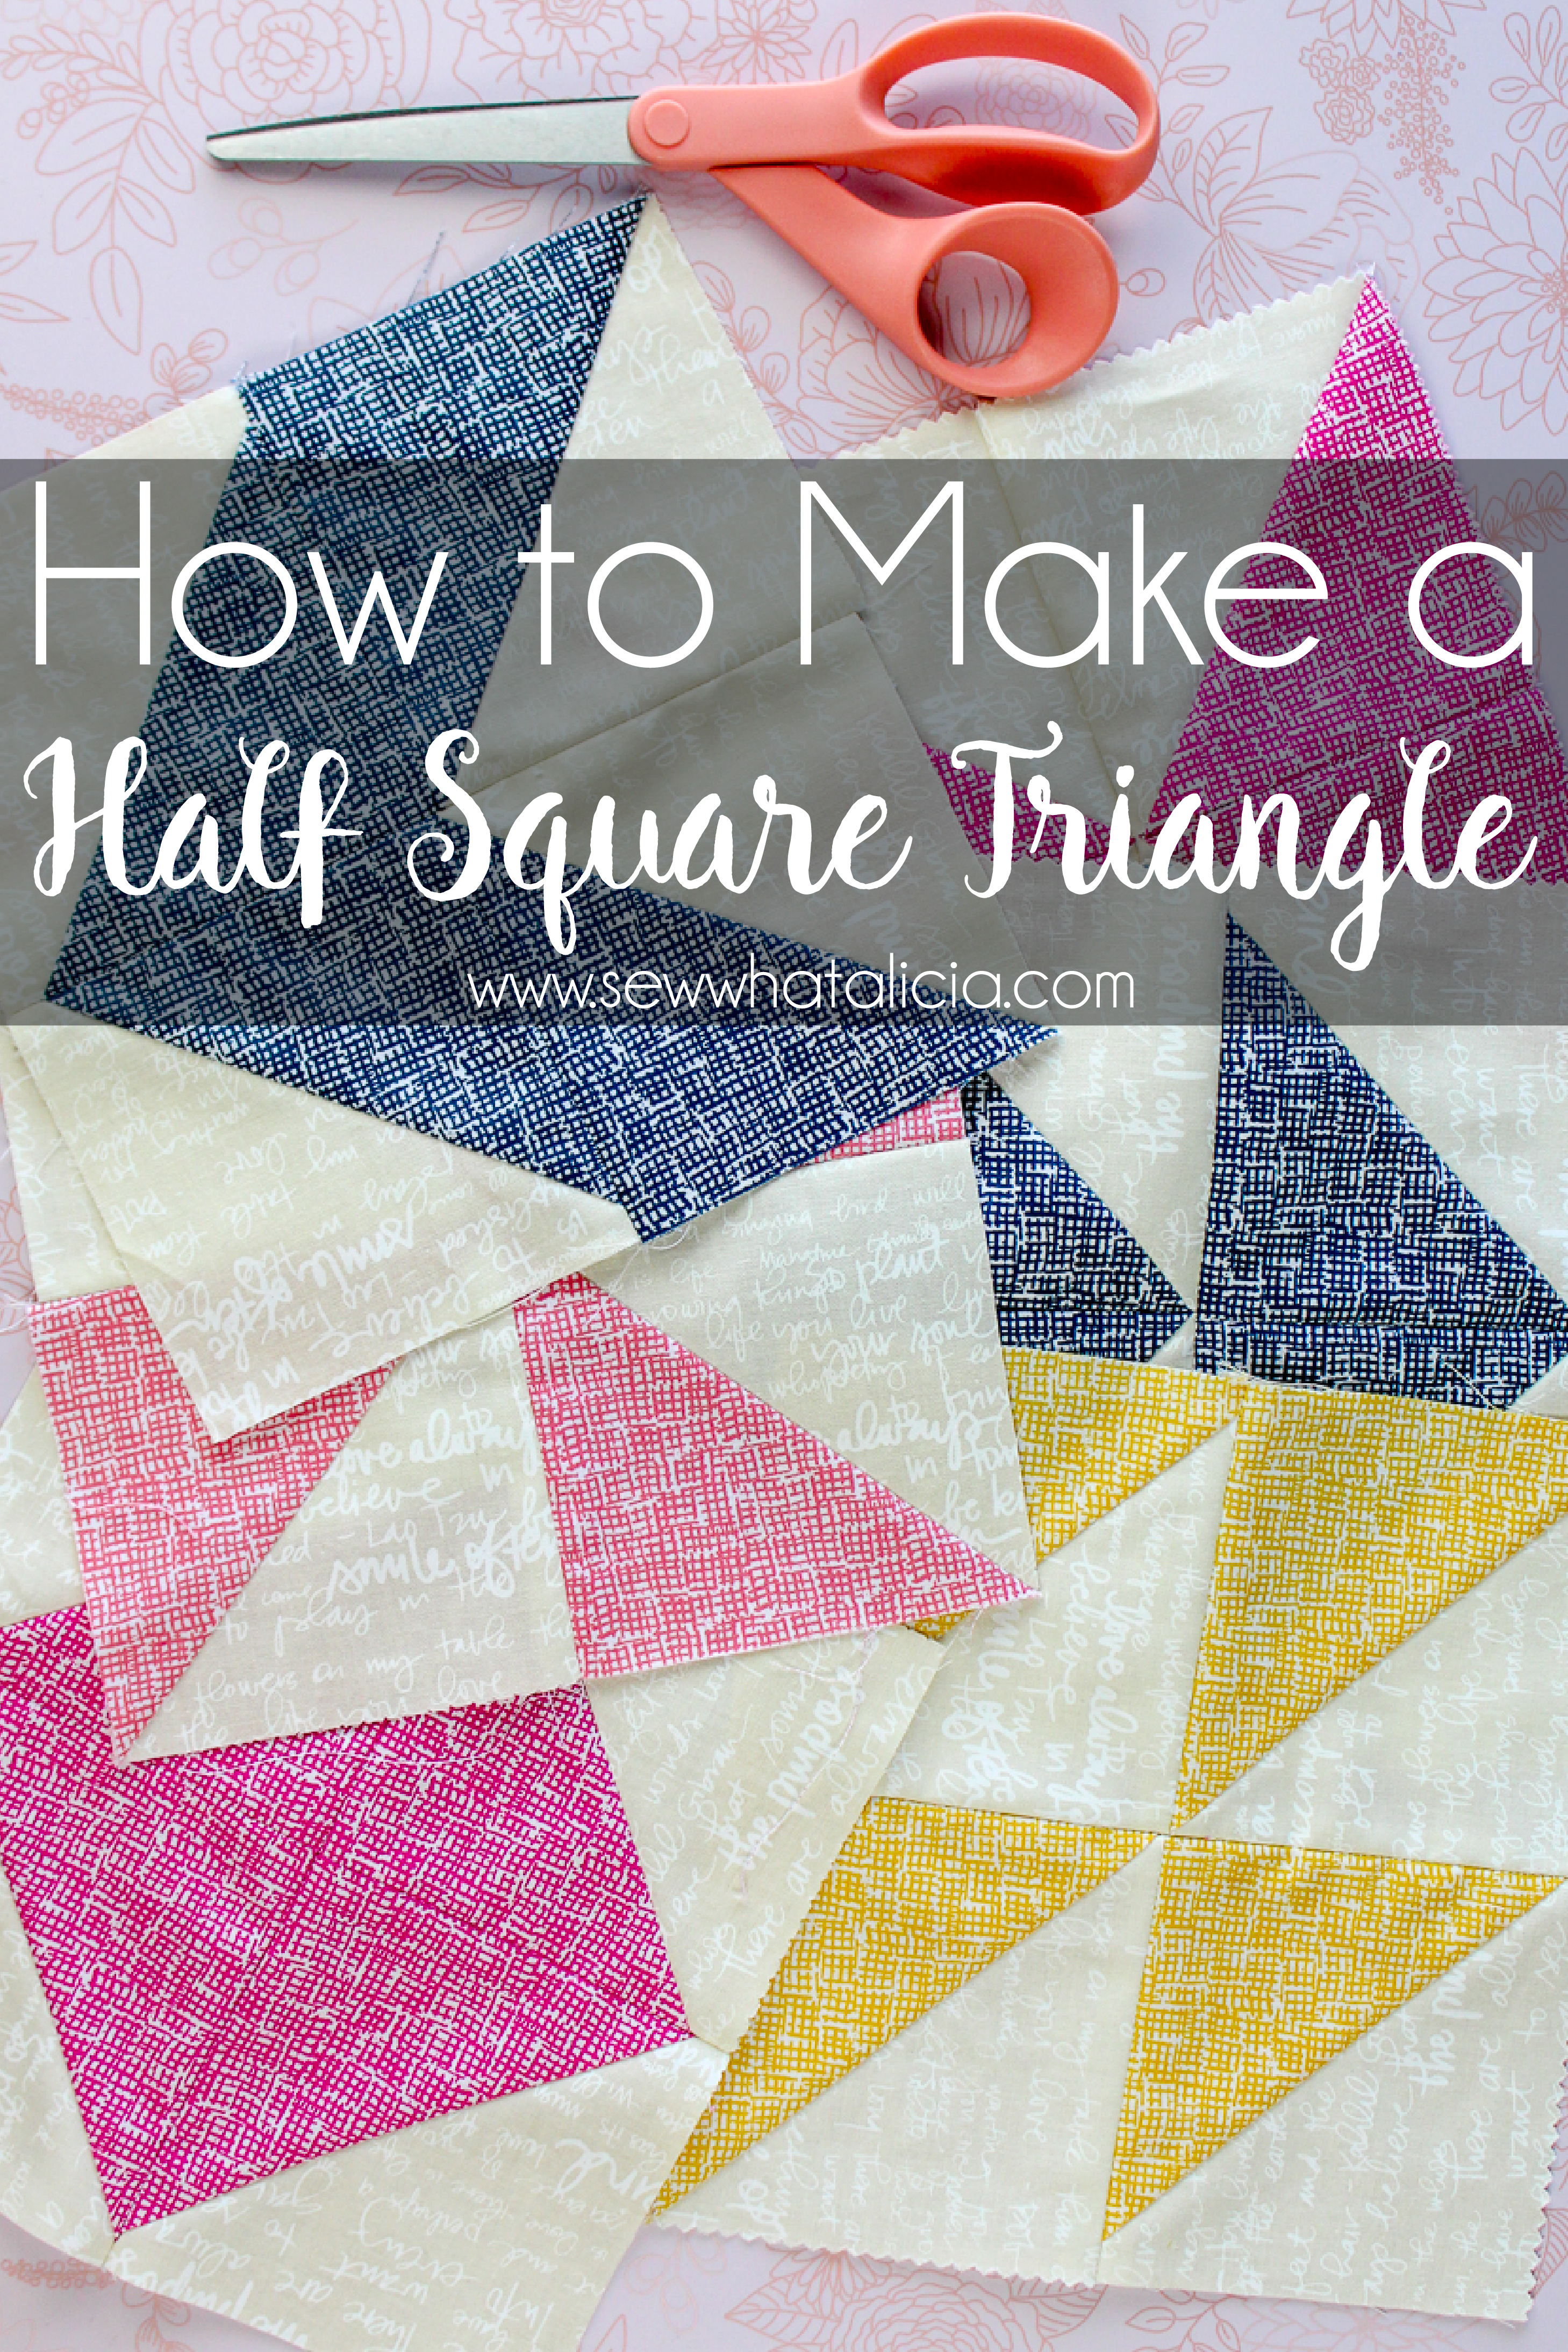 Half Square Triangles - 6 Easy Quilt Blocks and Patterns: This tutorial will teach you how to sew a half square triangle. It also includes 6 fun quilt designs using the half square triangle. Click through for the full tutorial and patterns. | www.sewwhatalicia.com